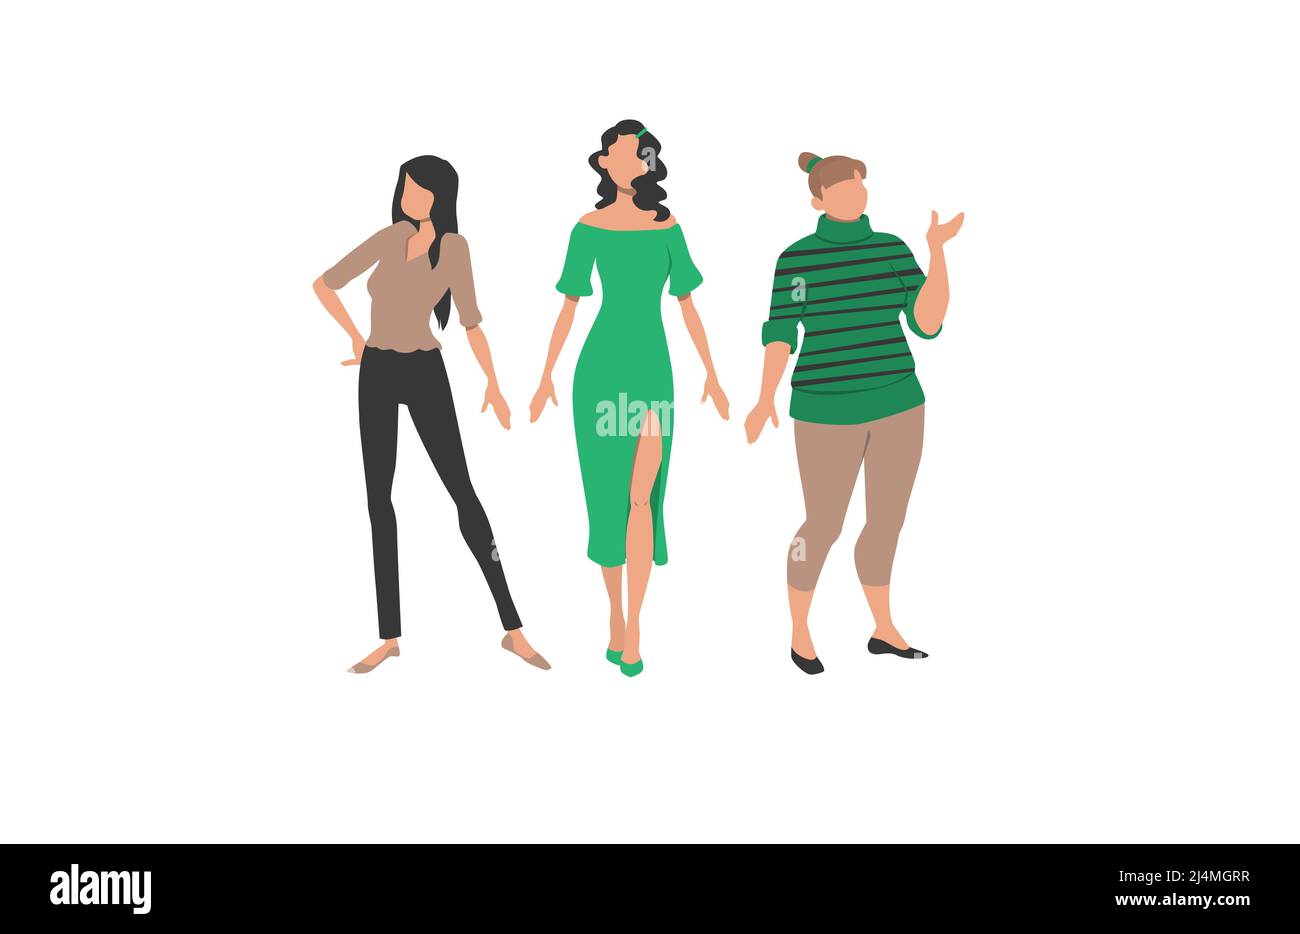 Three women representing different styles and body types. Clothes, style, figure. Can be used for topics like fashion, sizes, body difference. Stock Vector